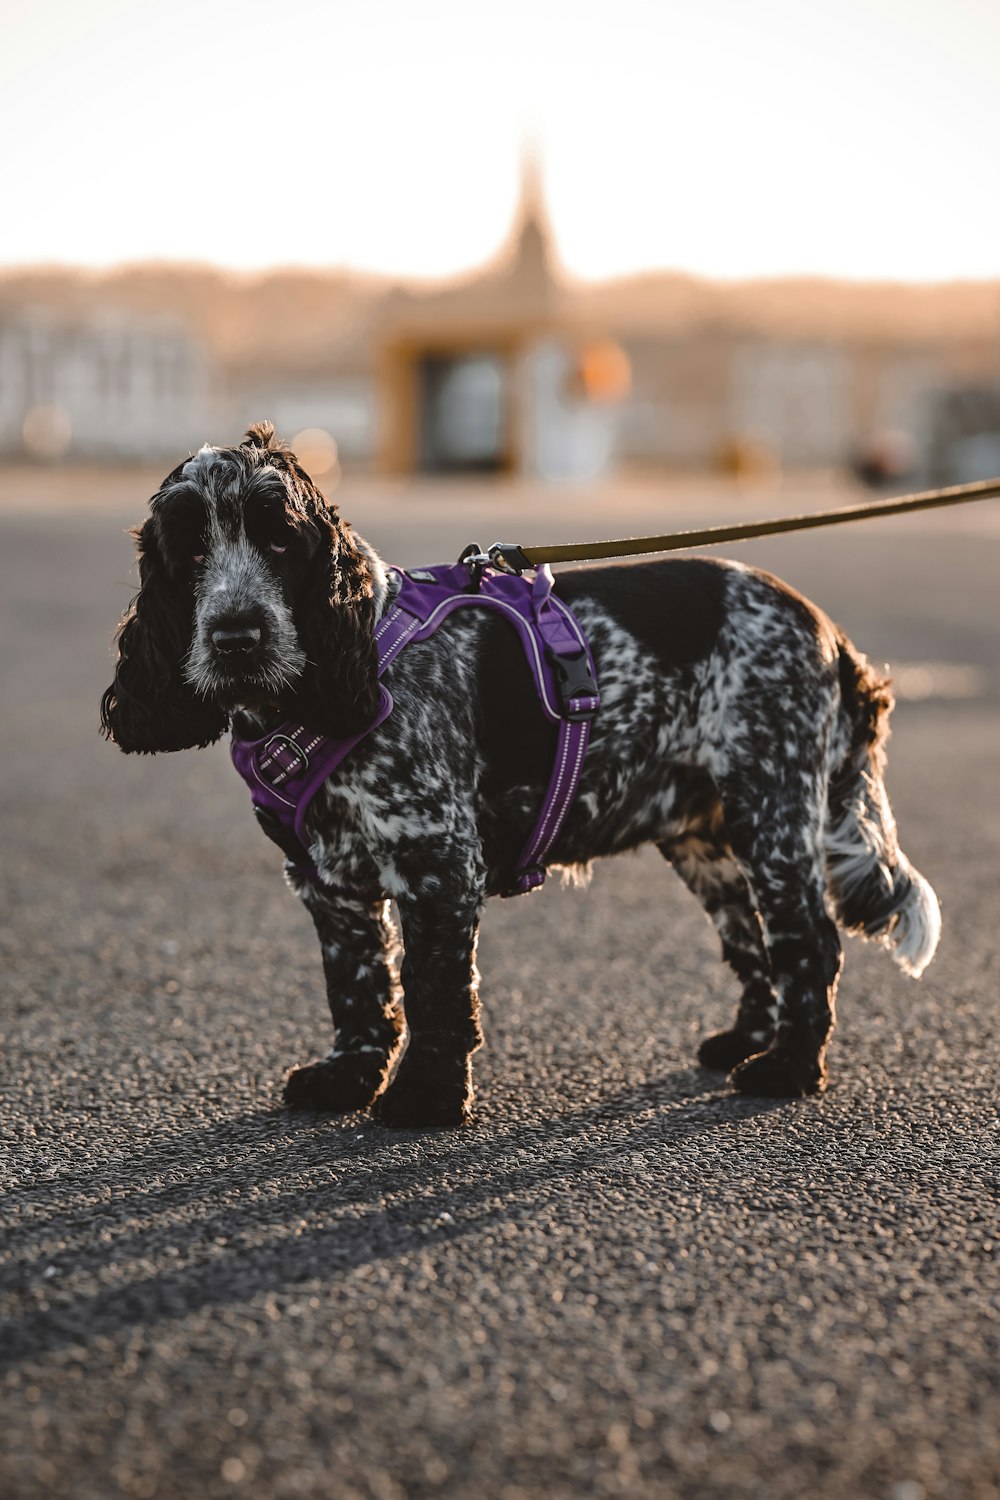 a black and white dog wearing a purple harness